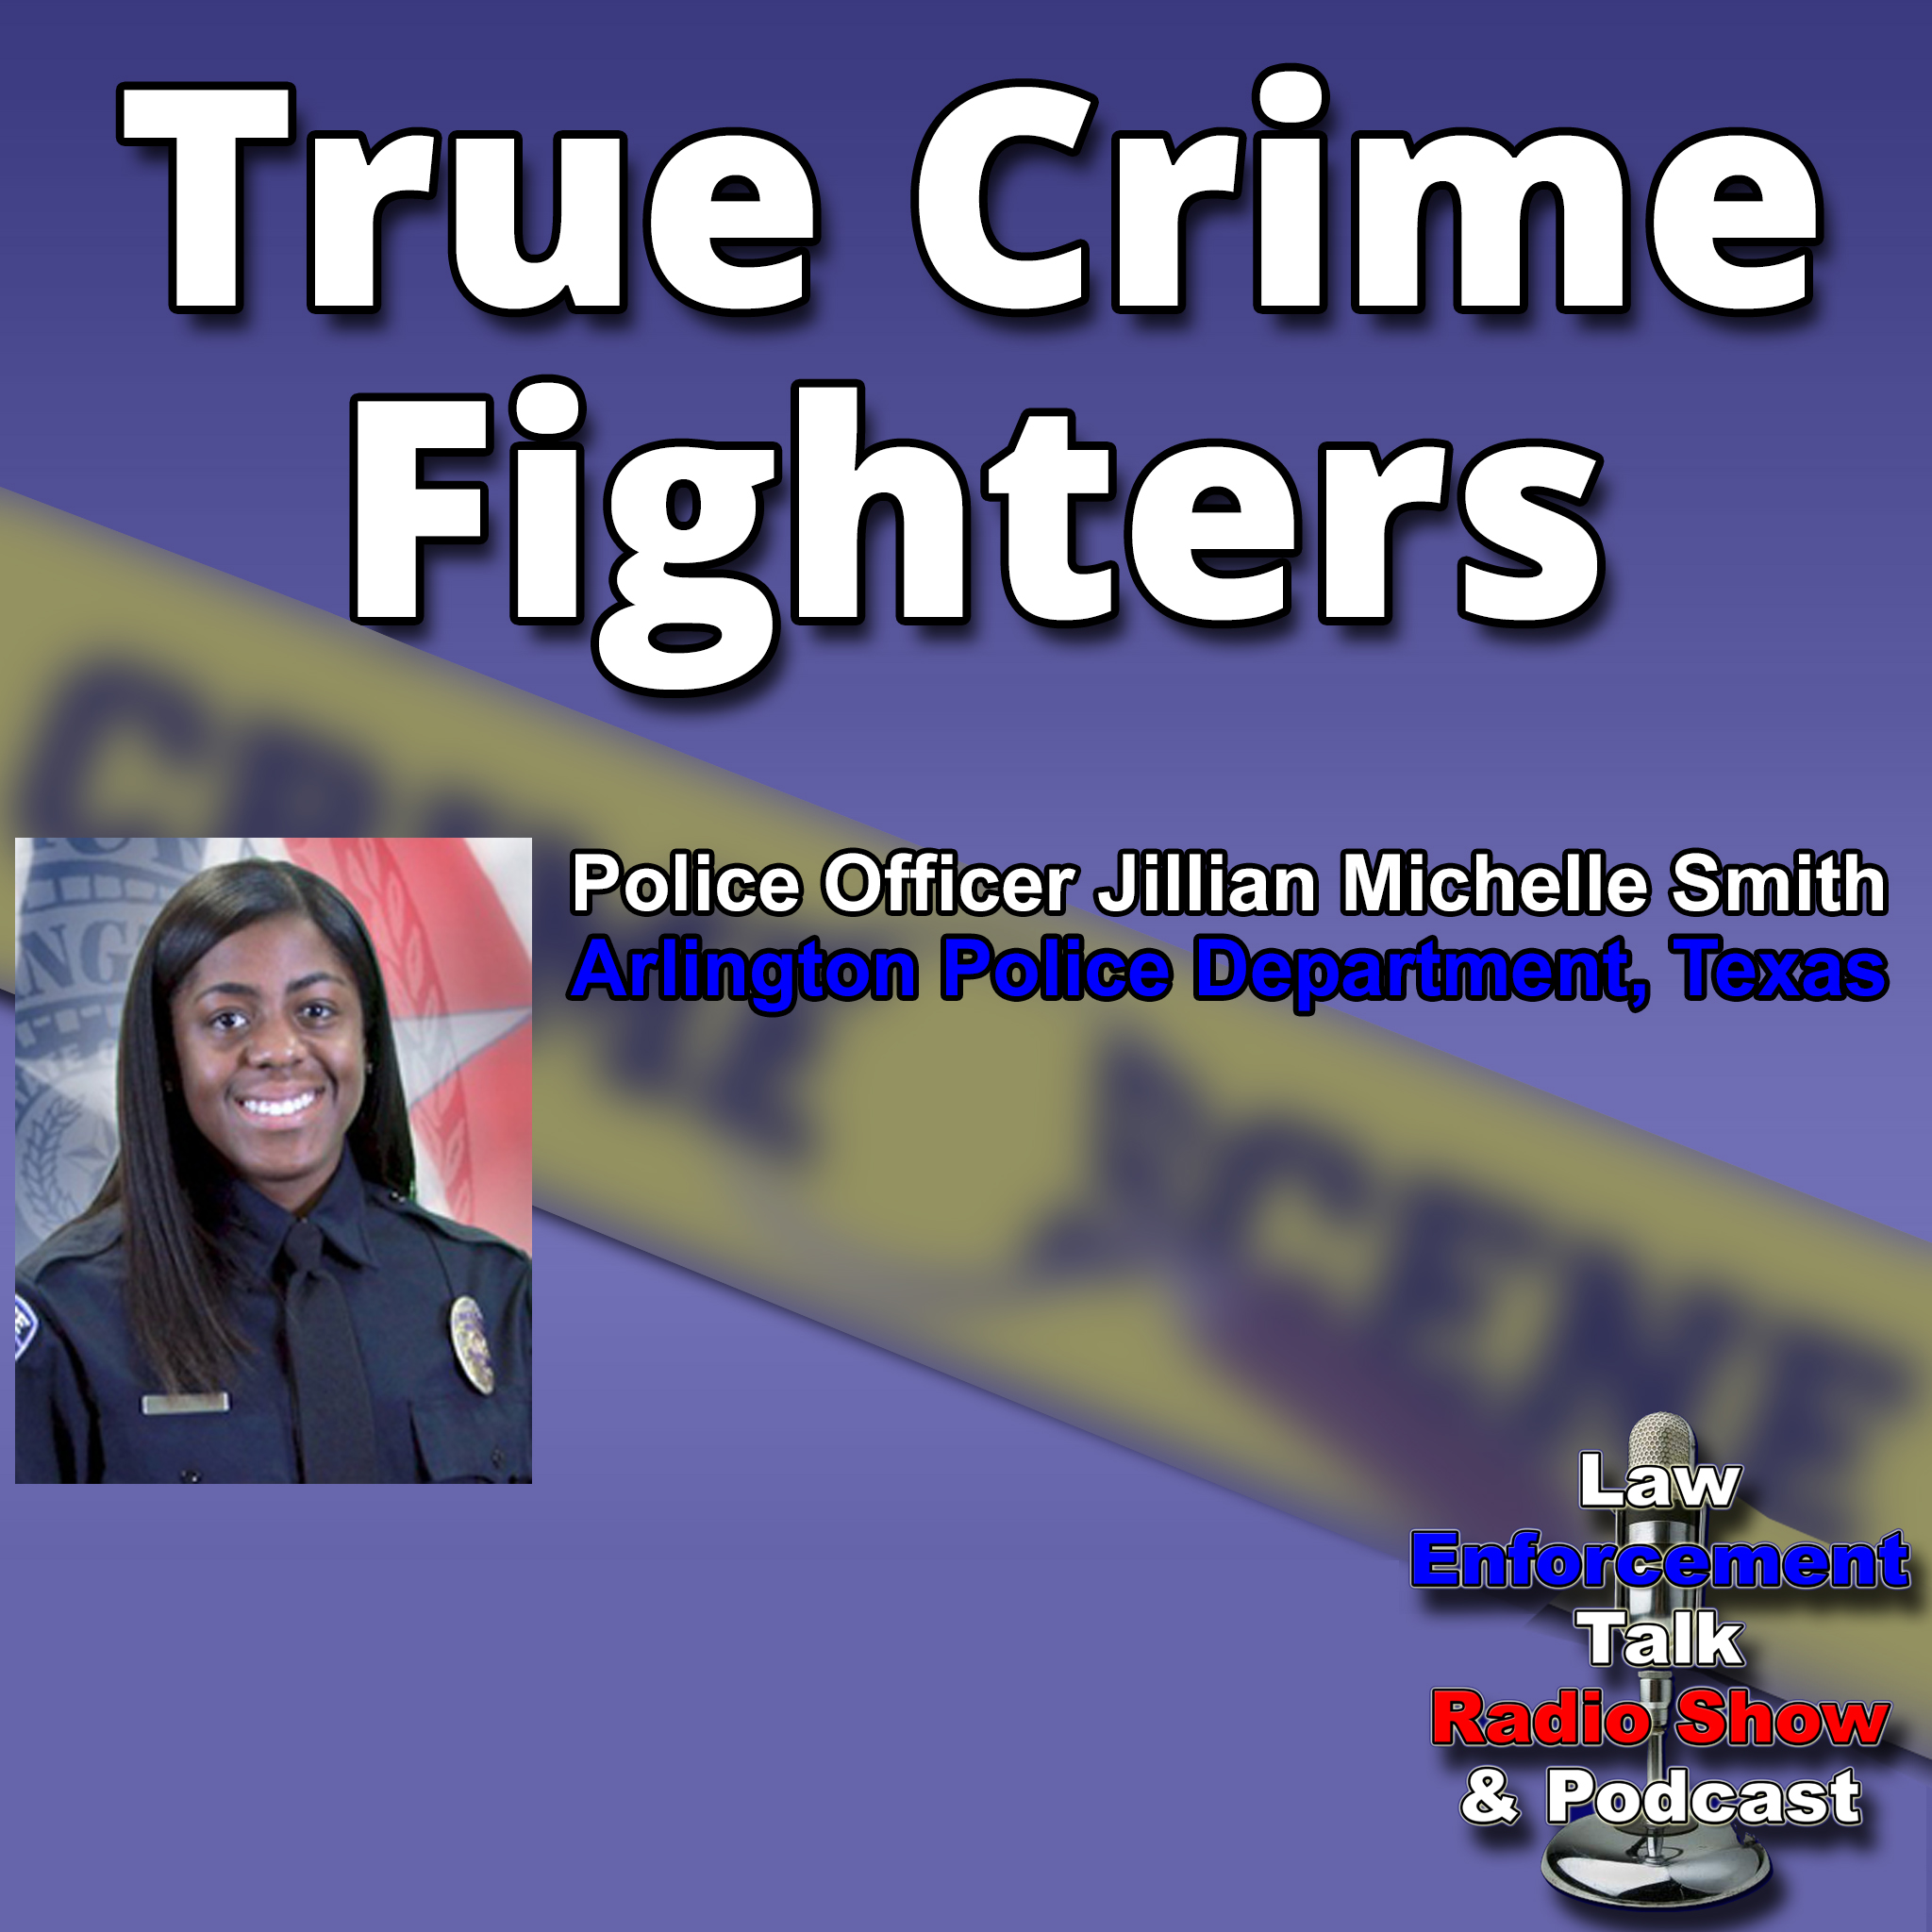 Police Officer Jillian Michelle Smith - Killed Protecting an 11-year-old.